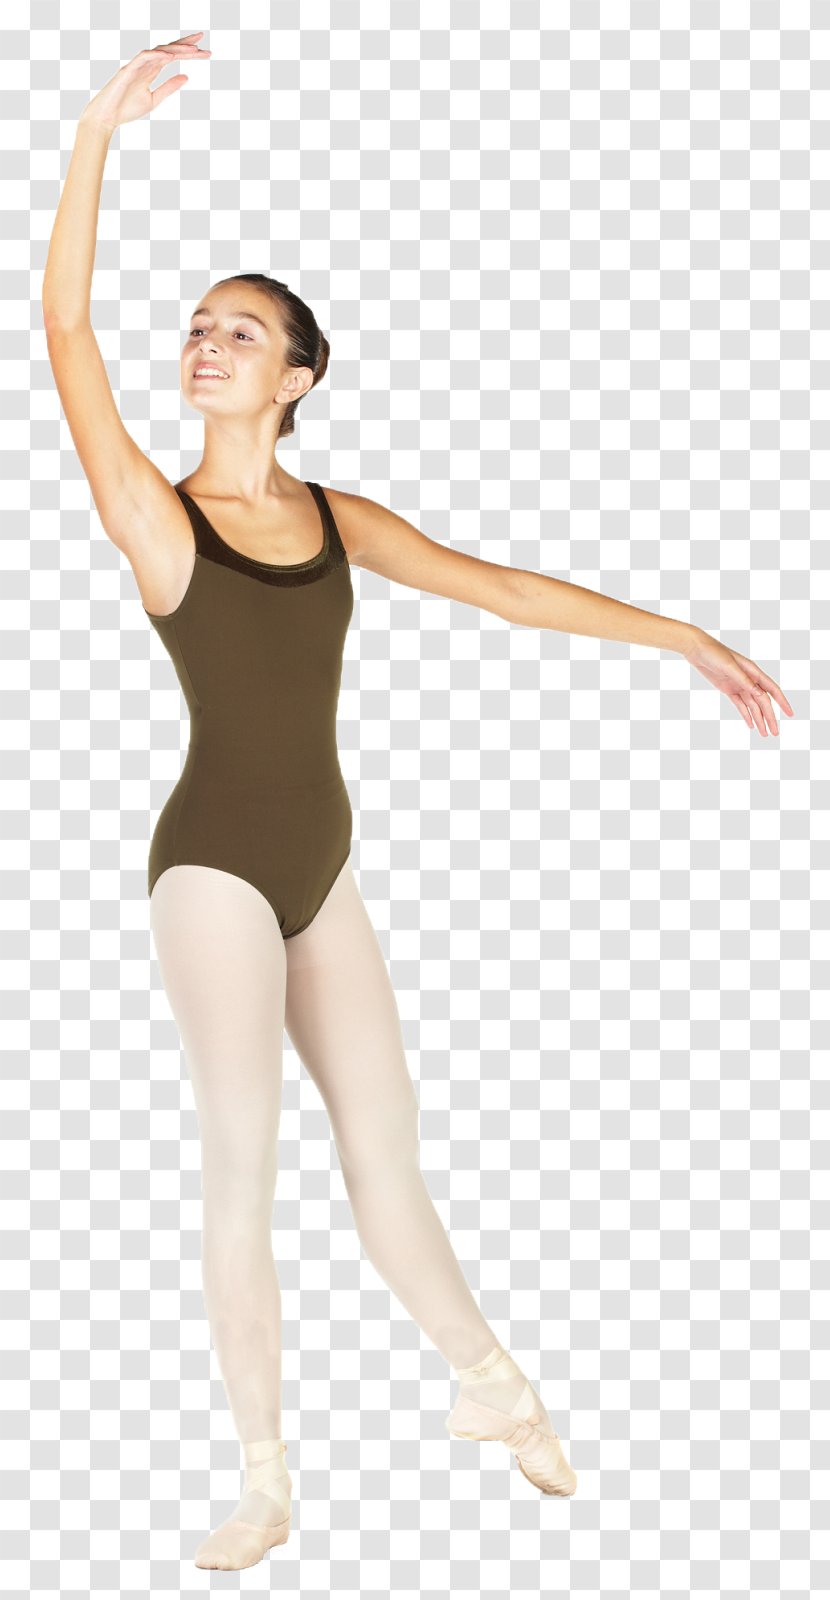 Positions Of The Feet In Ballet Dancer Classical - Silhouette Transparent PNG